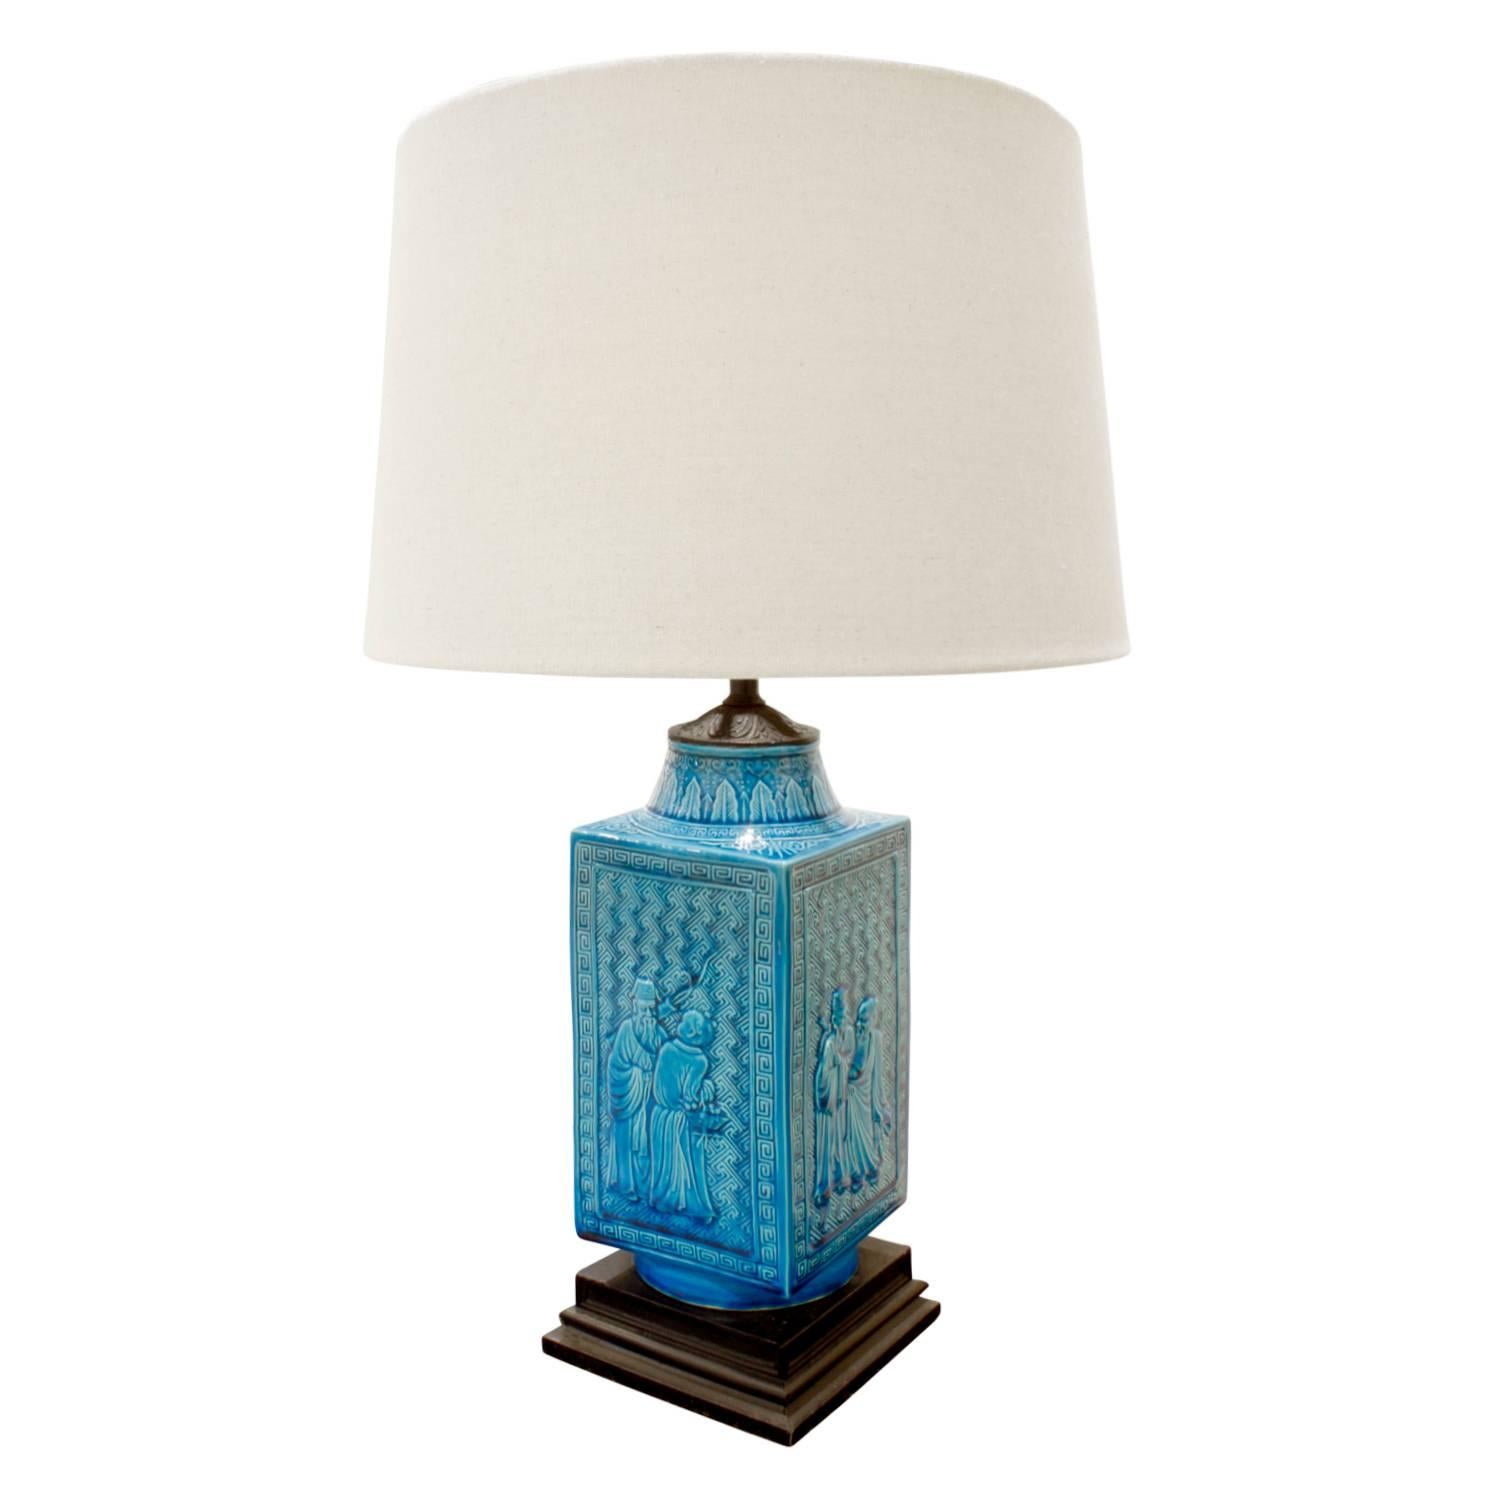 Studio made ceramic table lamp with deep blue glaze and Chinese motifs, American, 1950s.

Measure: Shade diameter 14 inches.